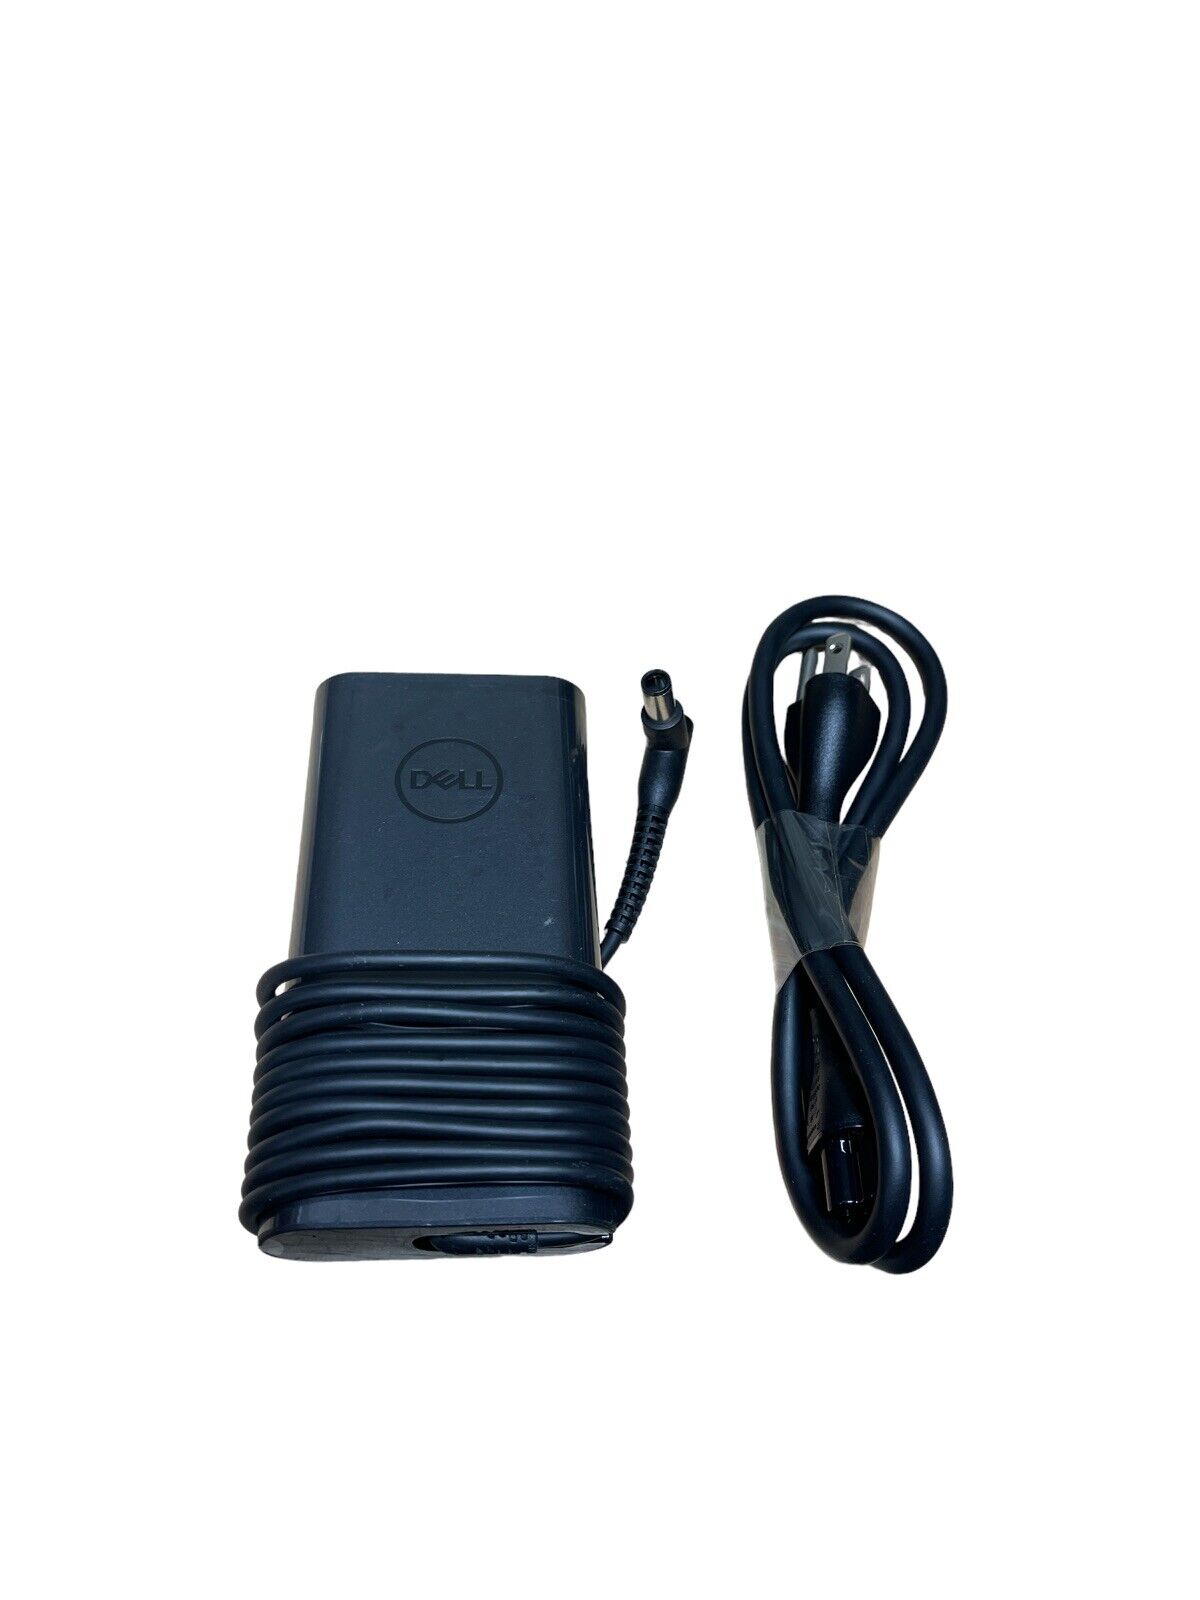 NEW DELL 90W LAPTOP ADAPTER 90YP3 L-TIP HA90PM180 **COMPLETE SET***